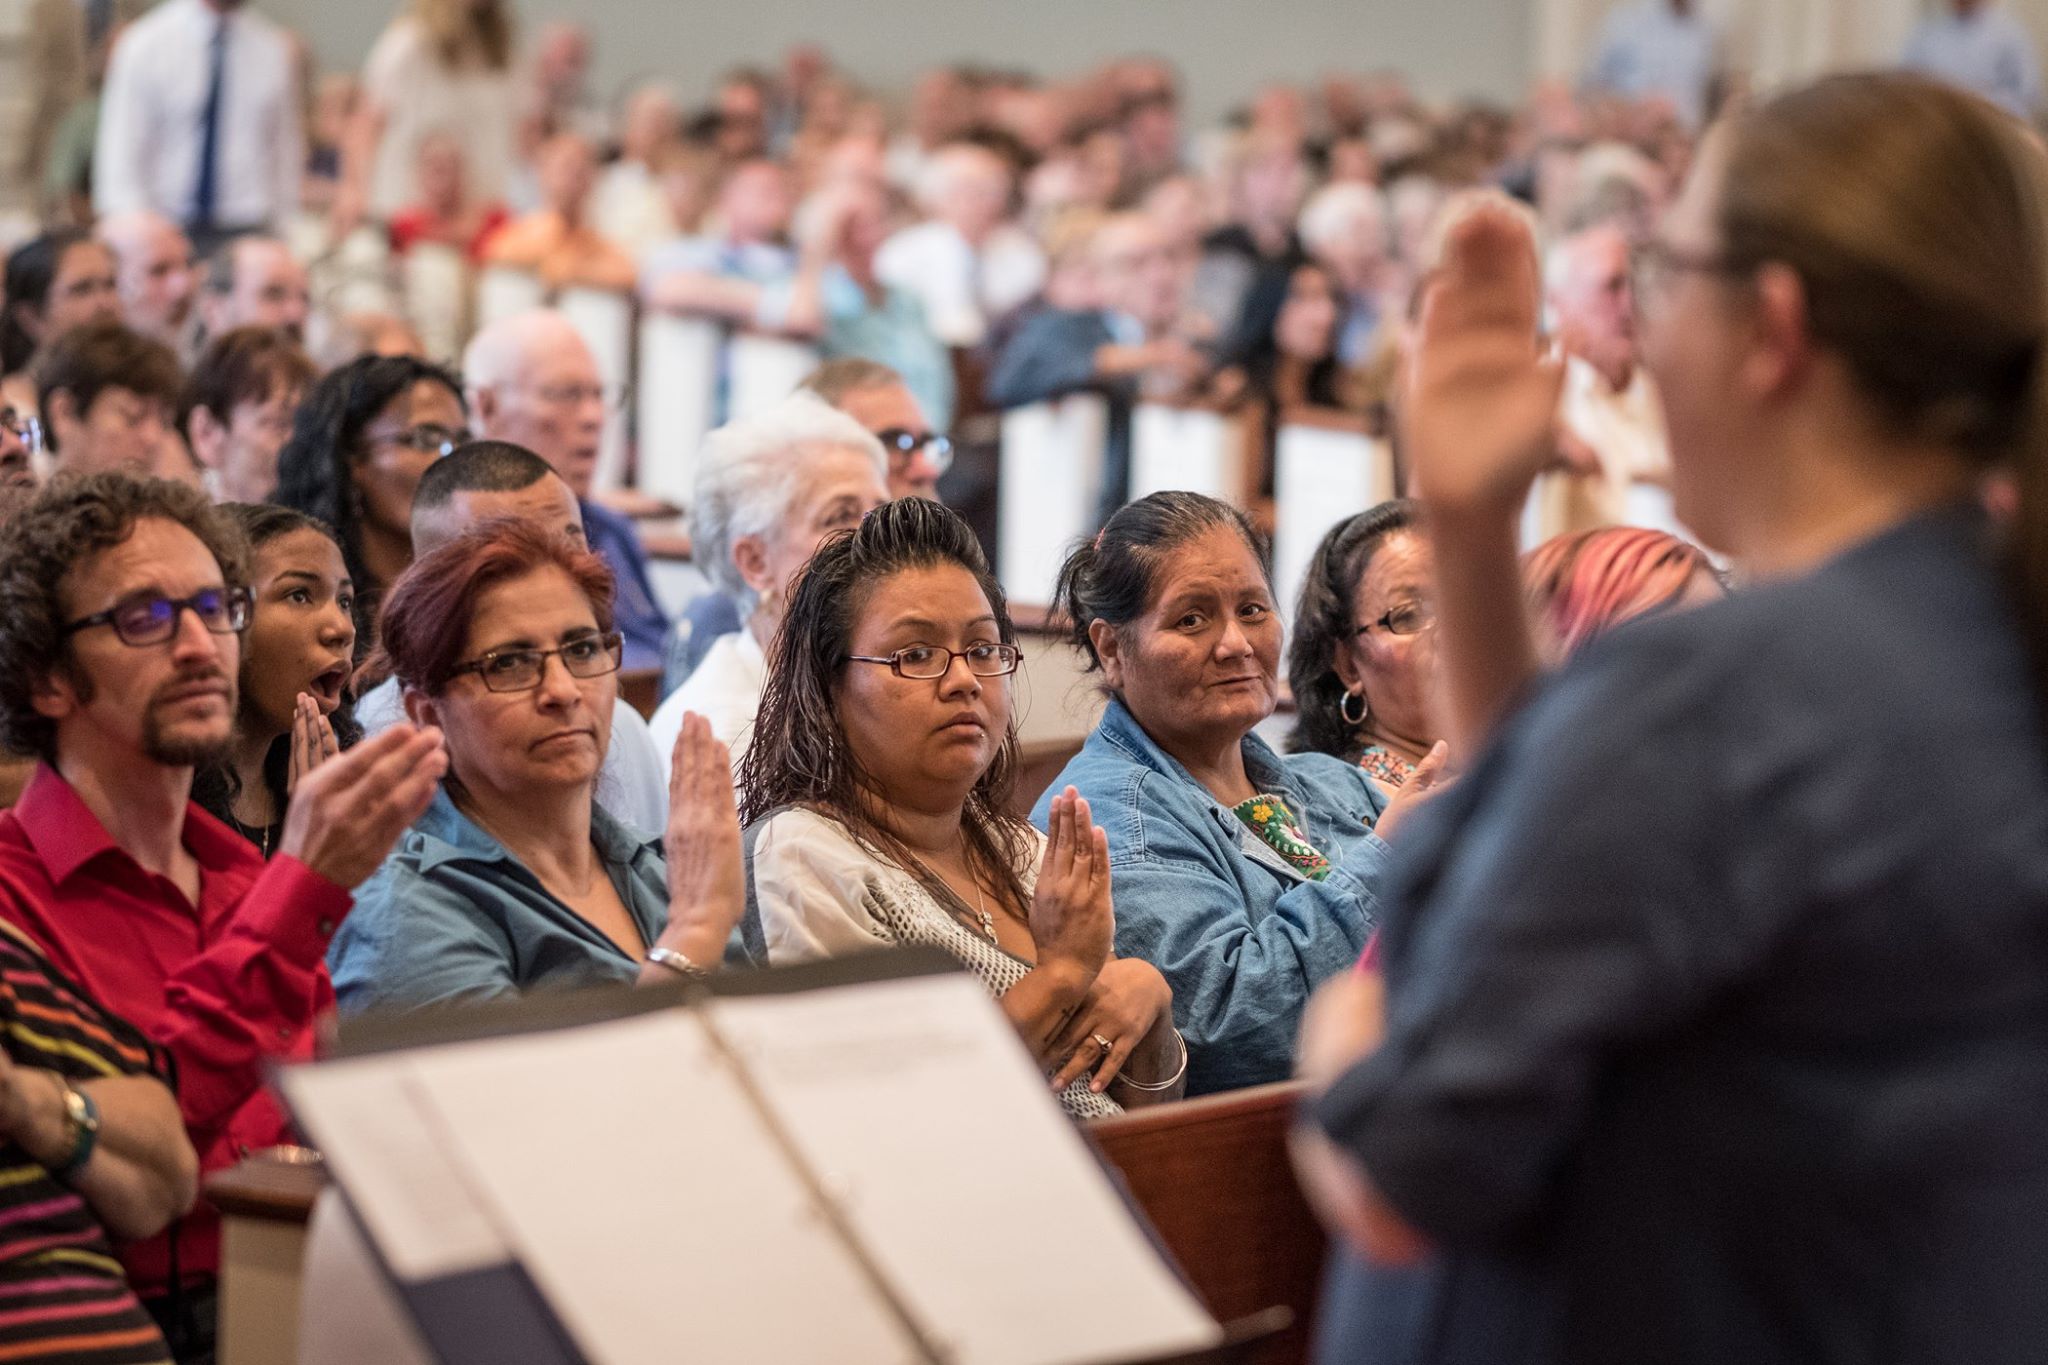 The deaf and hard-of-hearing ministry signing worship together